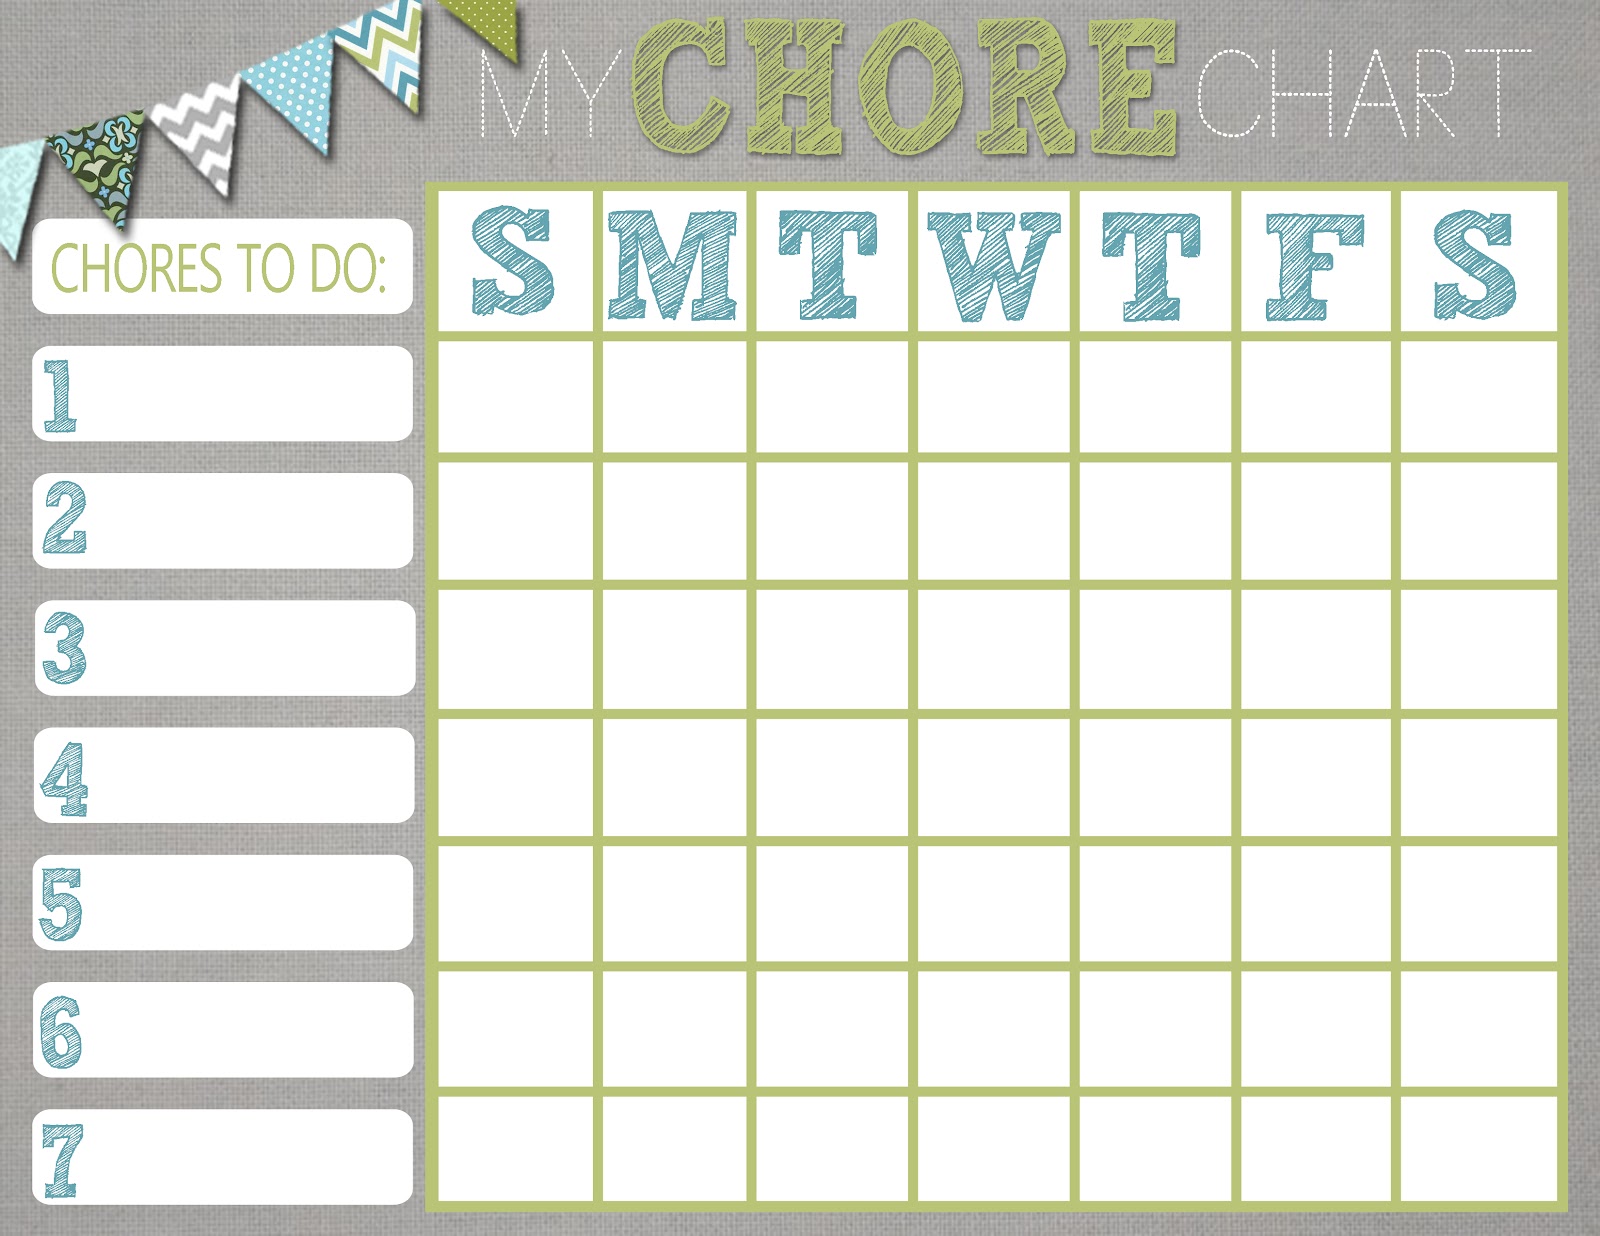 Downloadable Chore Chart Template from static.bedtimez.com